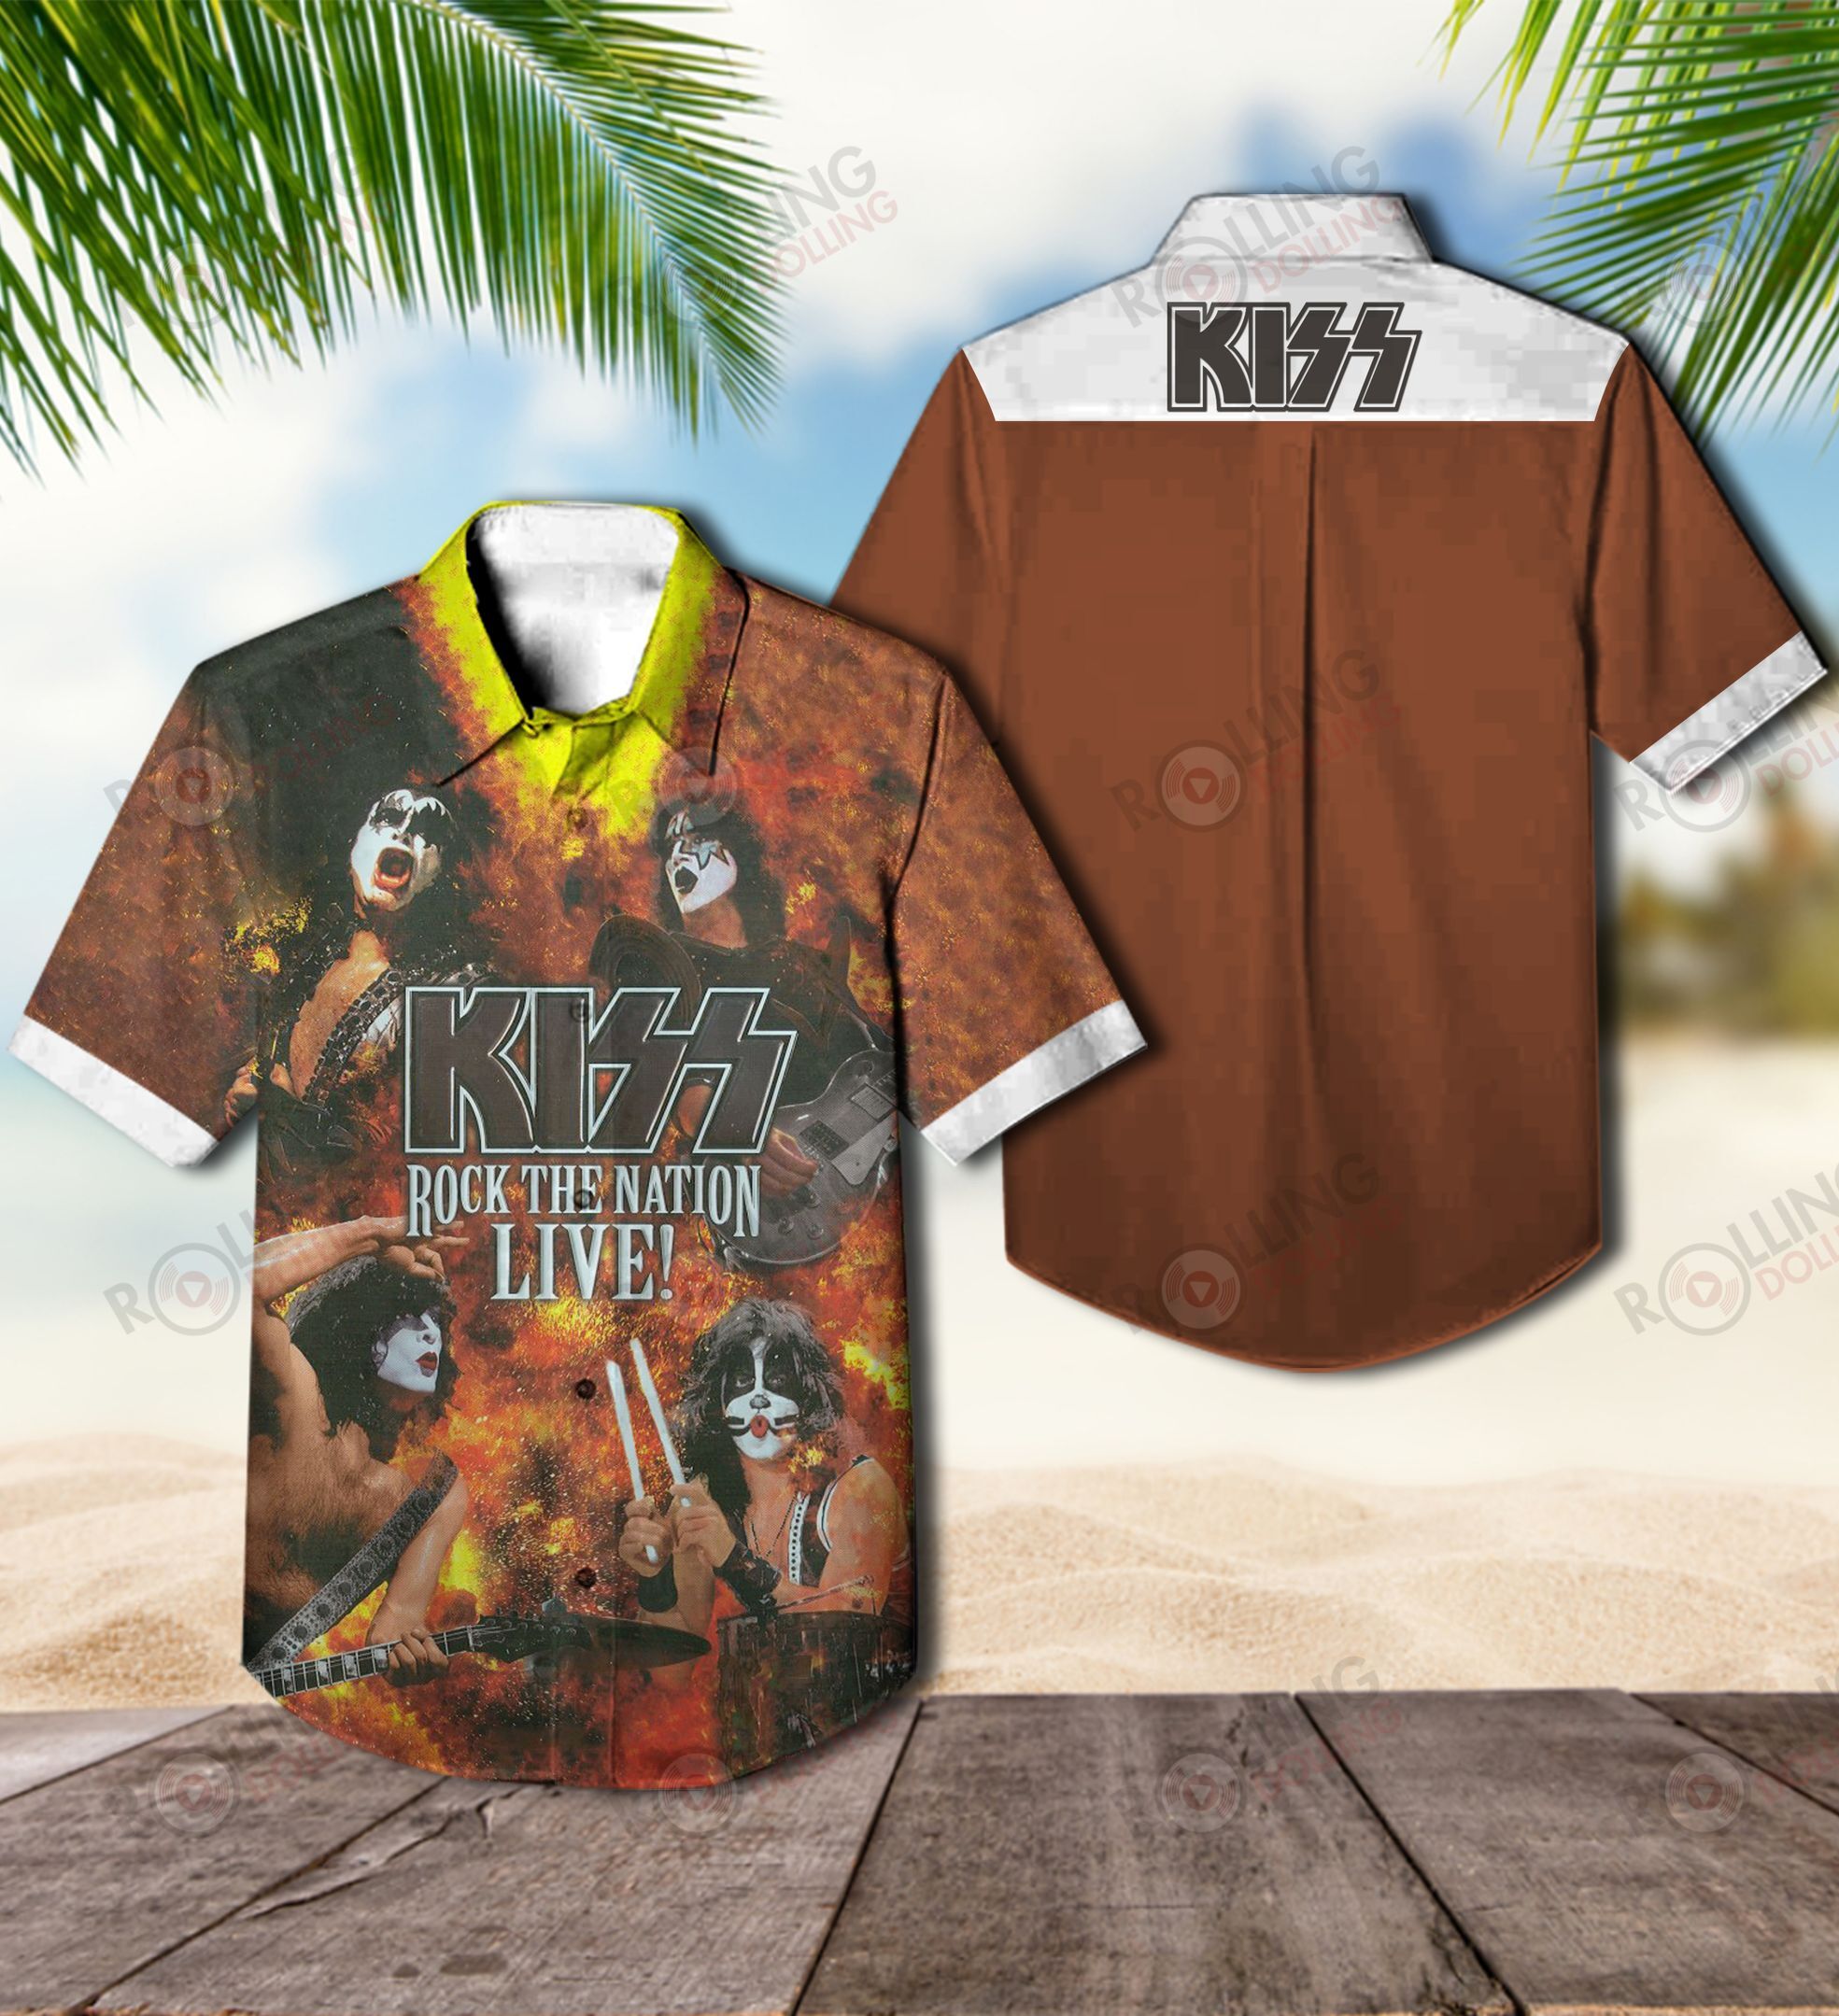 You'll have the perfect vacation outfit with this Hawaiian shirt 77